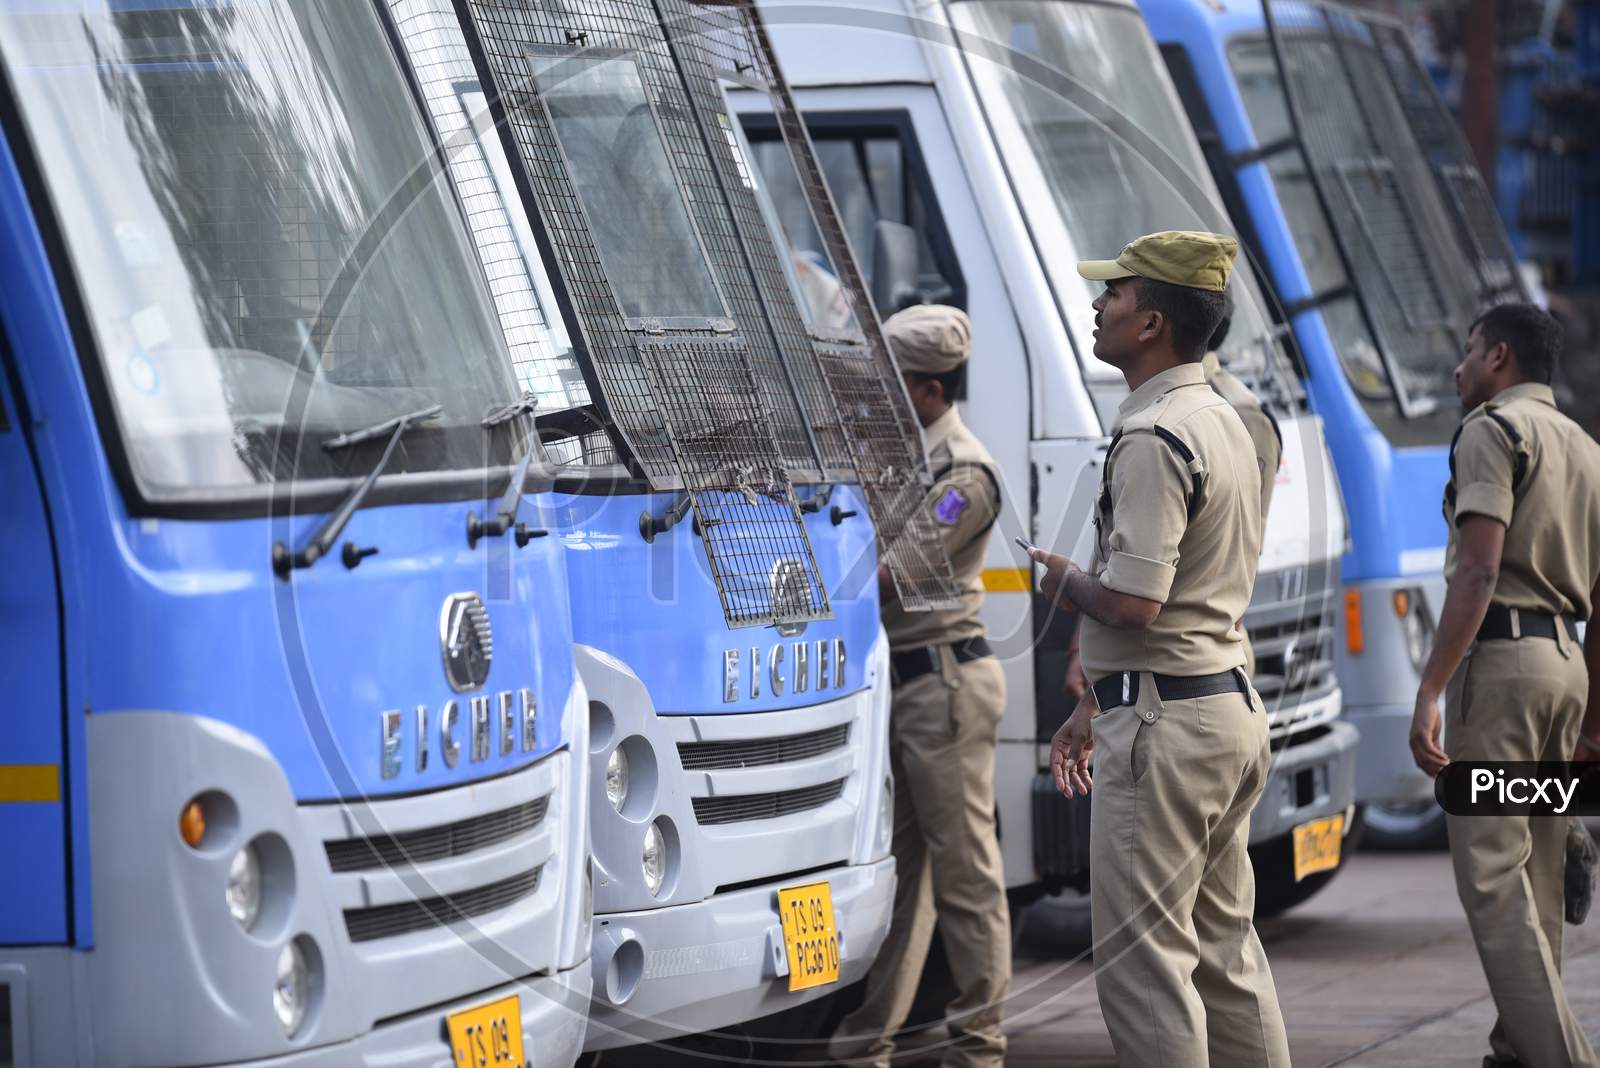 Hyderabad Police vans halted to carry people in Vans who were protesting against Citizenship Amendment Act 2019, Dec 19,2019.